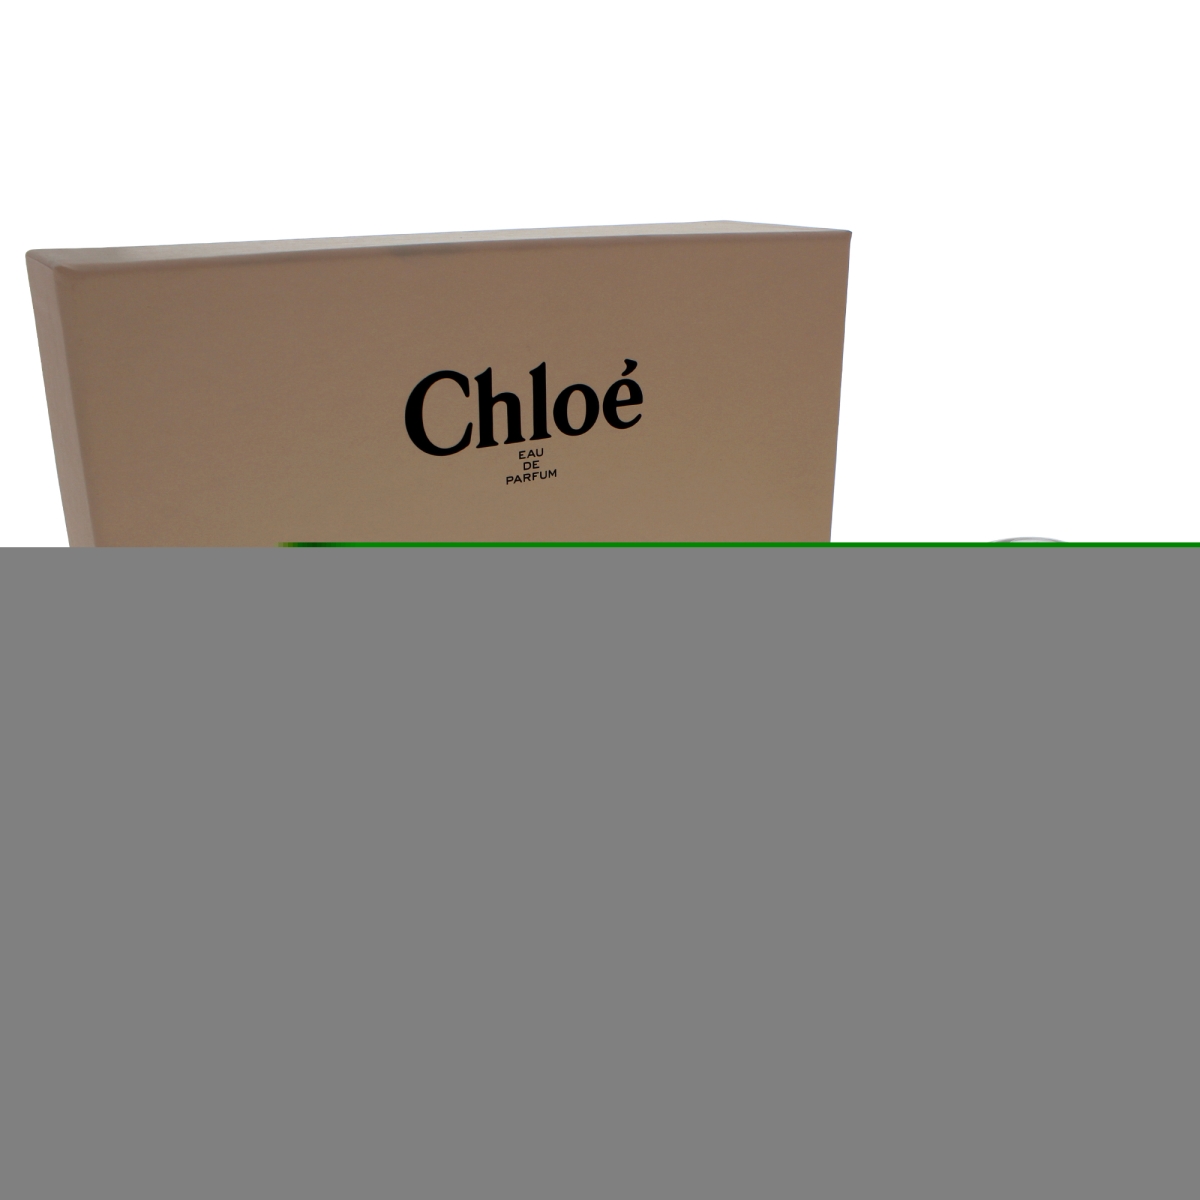 Picture of Parfums Chloe W-GS-3931 Chloe Gift Set for Women - 3 Piece